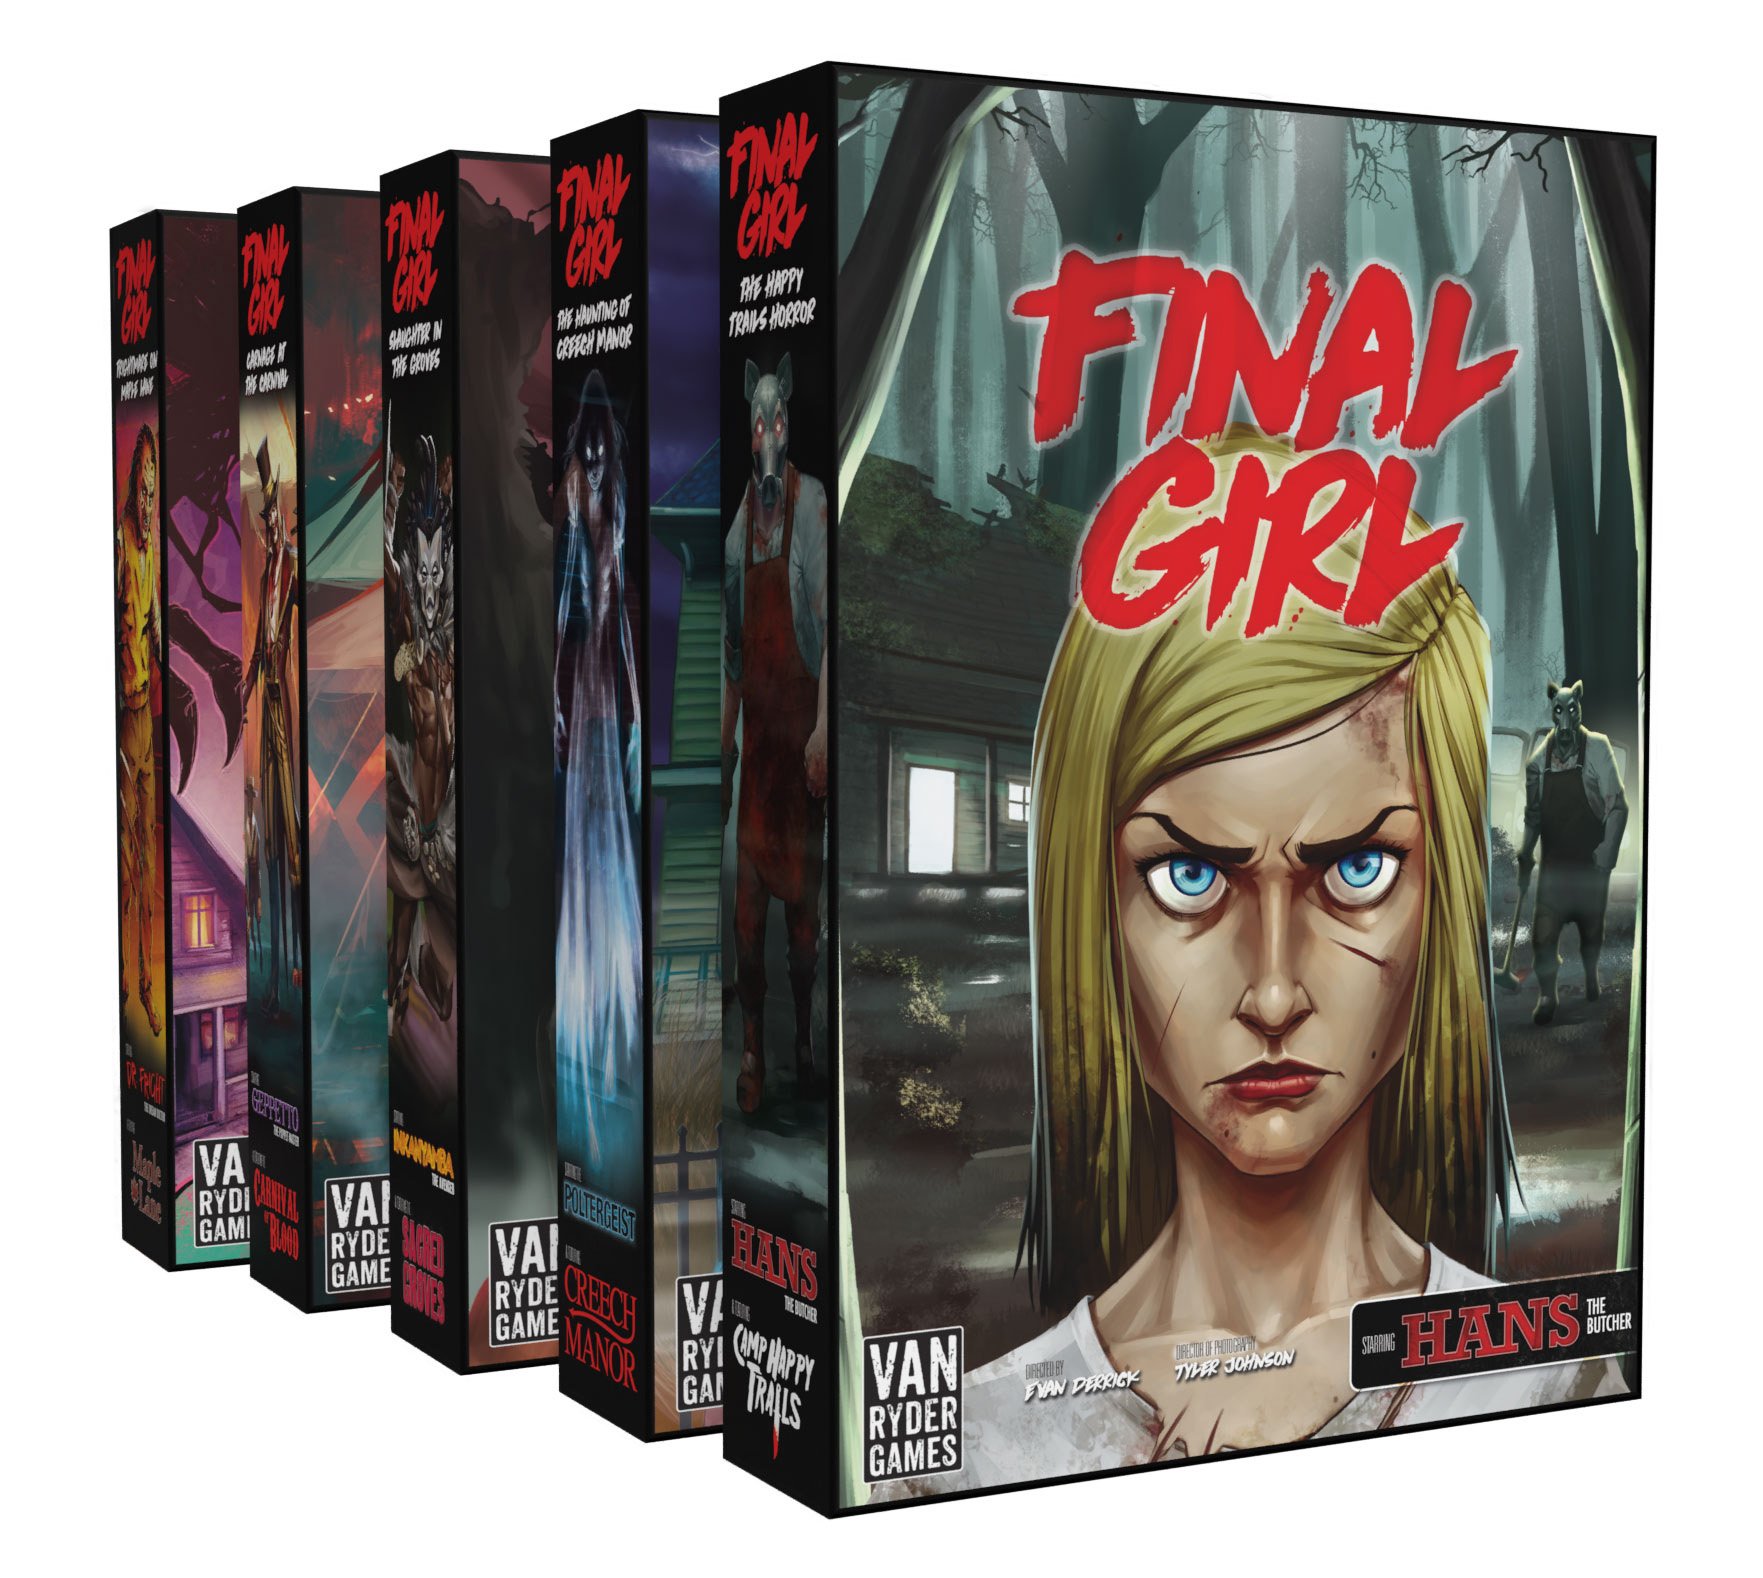 Overview of Final Girl Game